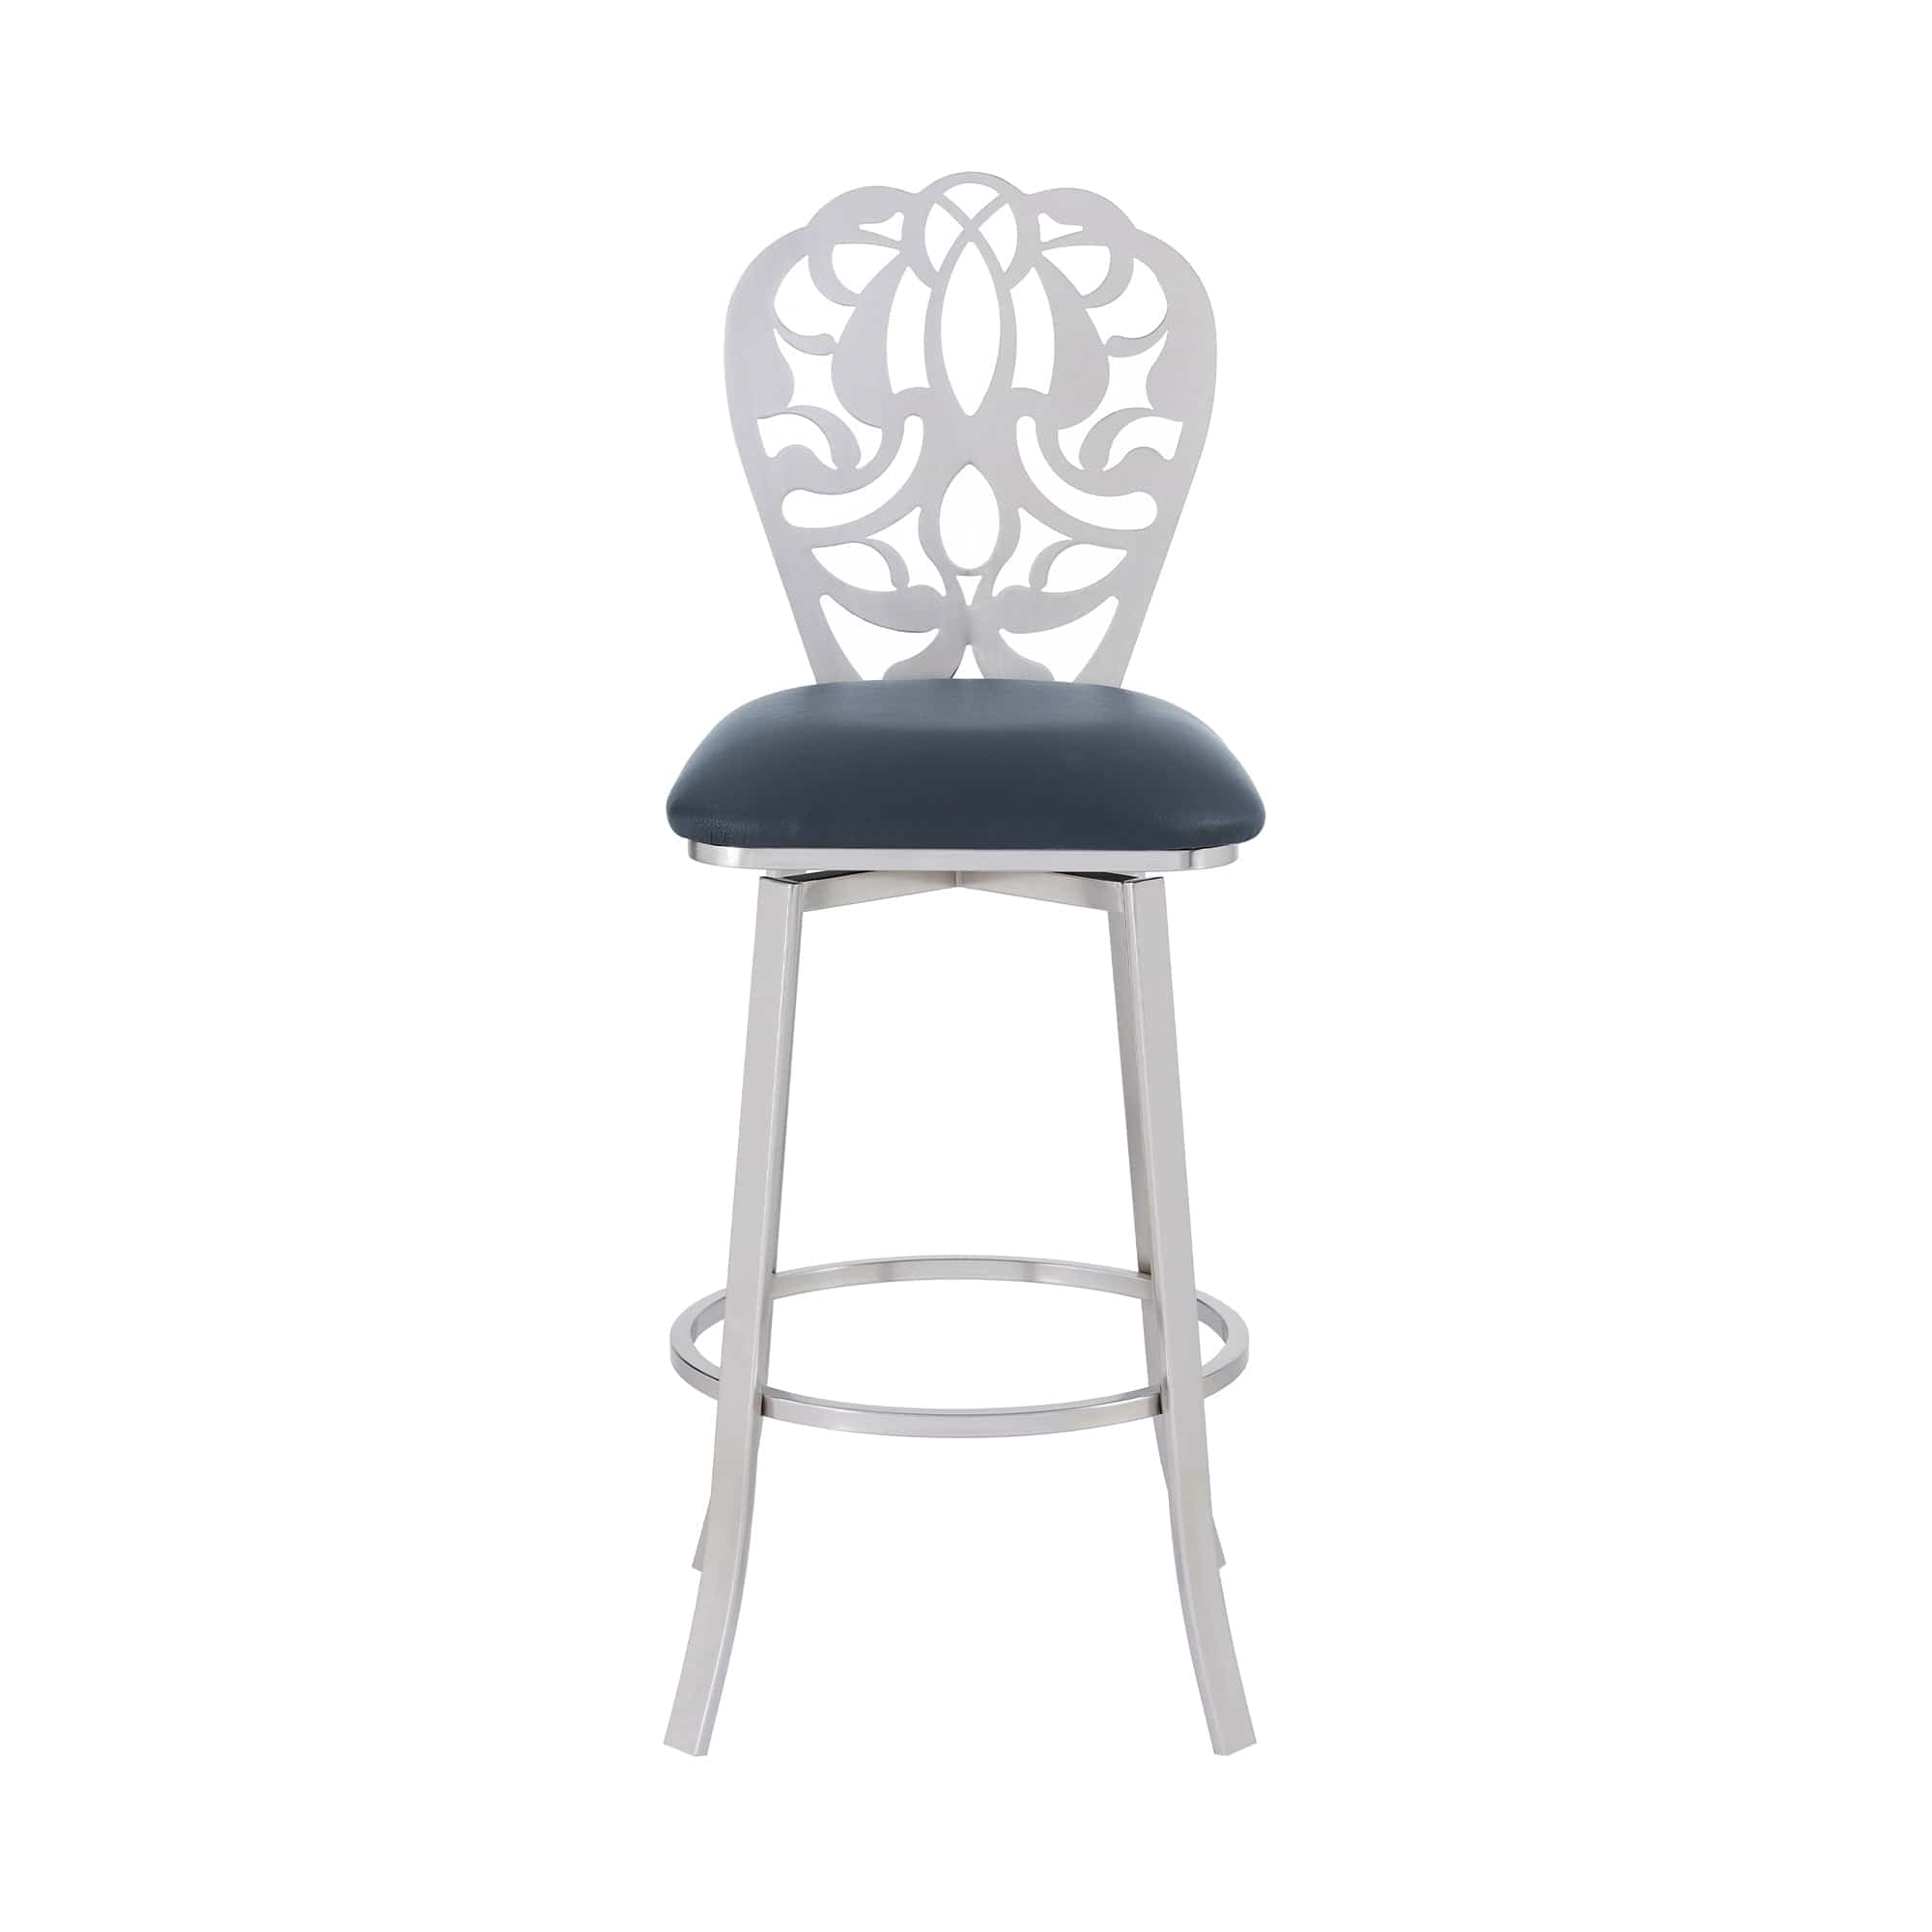 Armen Living Barstool Armen Living | Cherie Contemporary 30" Bar Height Barstool in Brushed Stainless Steel Finish and Gray Faux Leather | LCCHBABSGR30